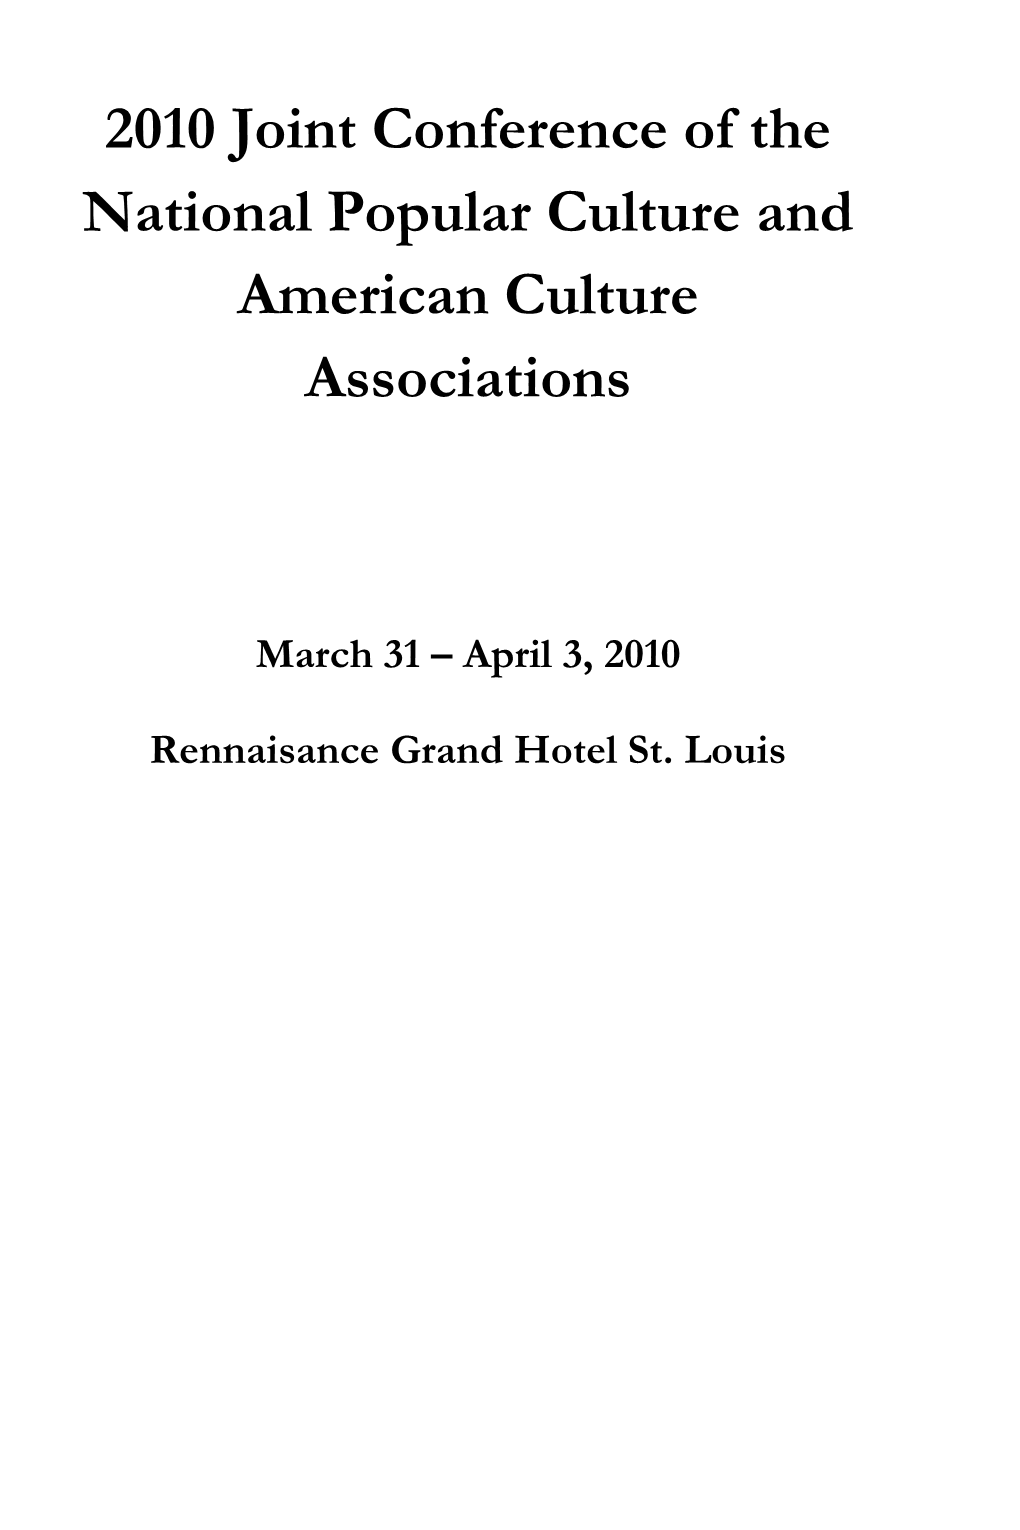 2010 Joint Conference of the National Popular Culture and American Culture Associations